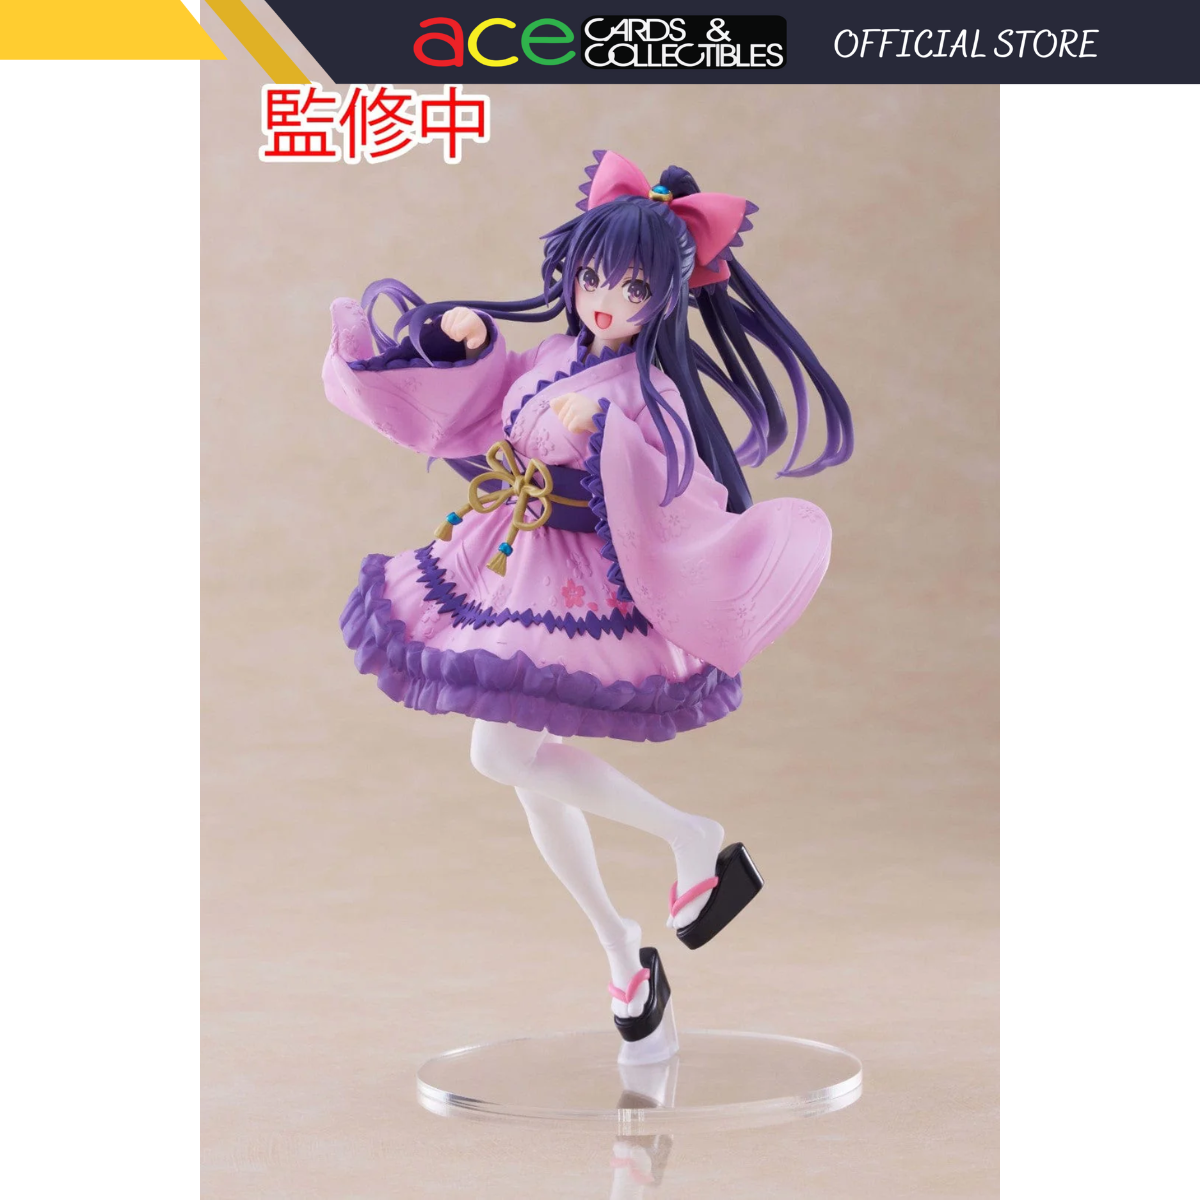 Date A Live IV Coreful Figure "Tohka Yatogami" (Japanese Gothic Ver.)-Taito-Ace Cards & Collectibles